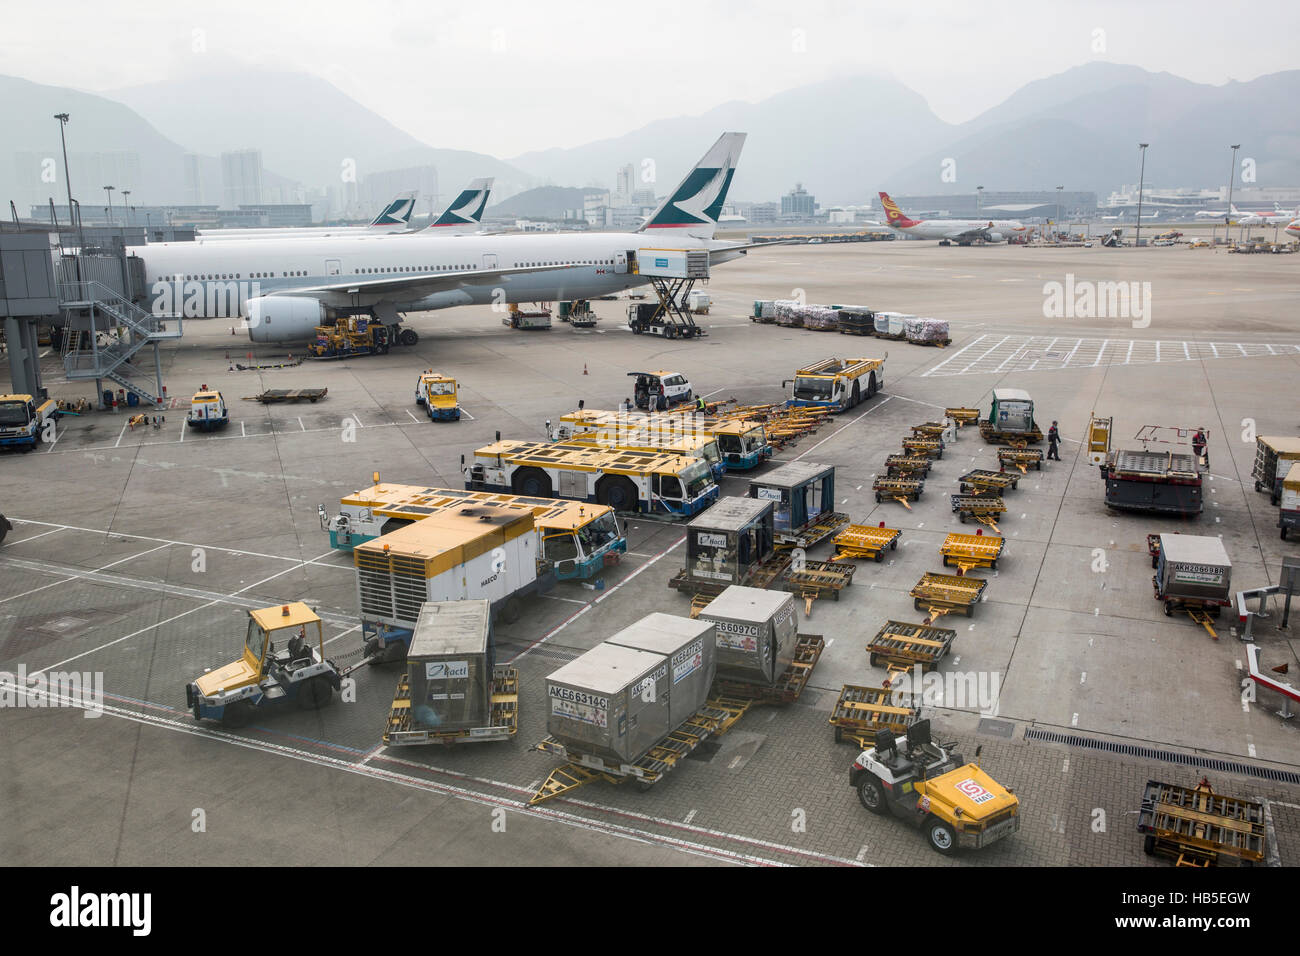 A airplane is being loaded with cargo in preparation for departure at Hongkong International Airport Stock Photo